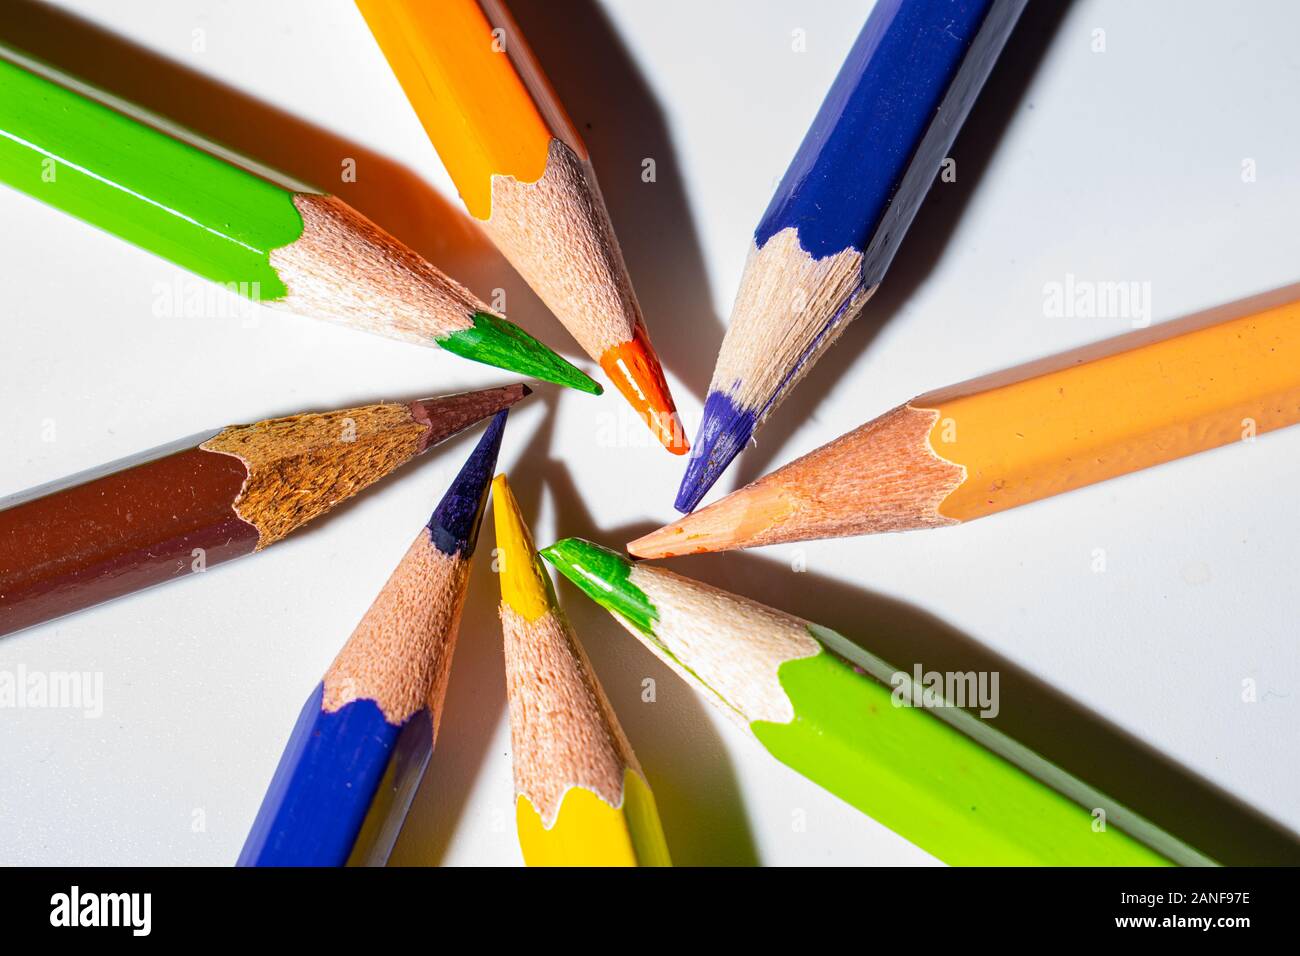 Different colors of pencils, in a spiral pattern. Colored crayons arranged in a meaningful way. Stock Photo